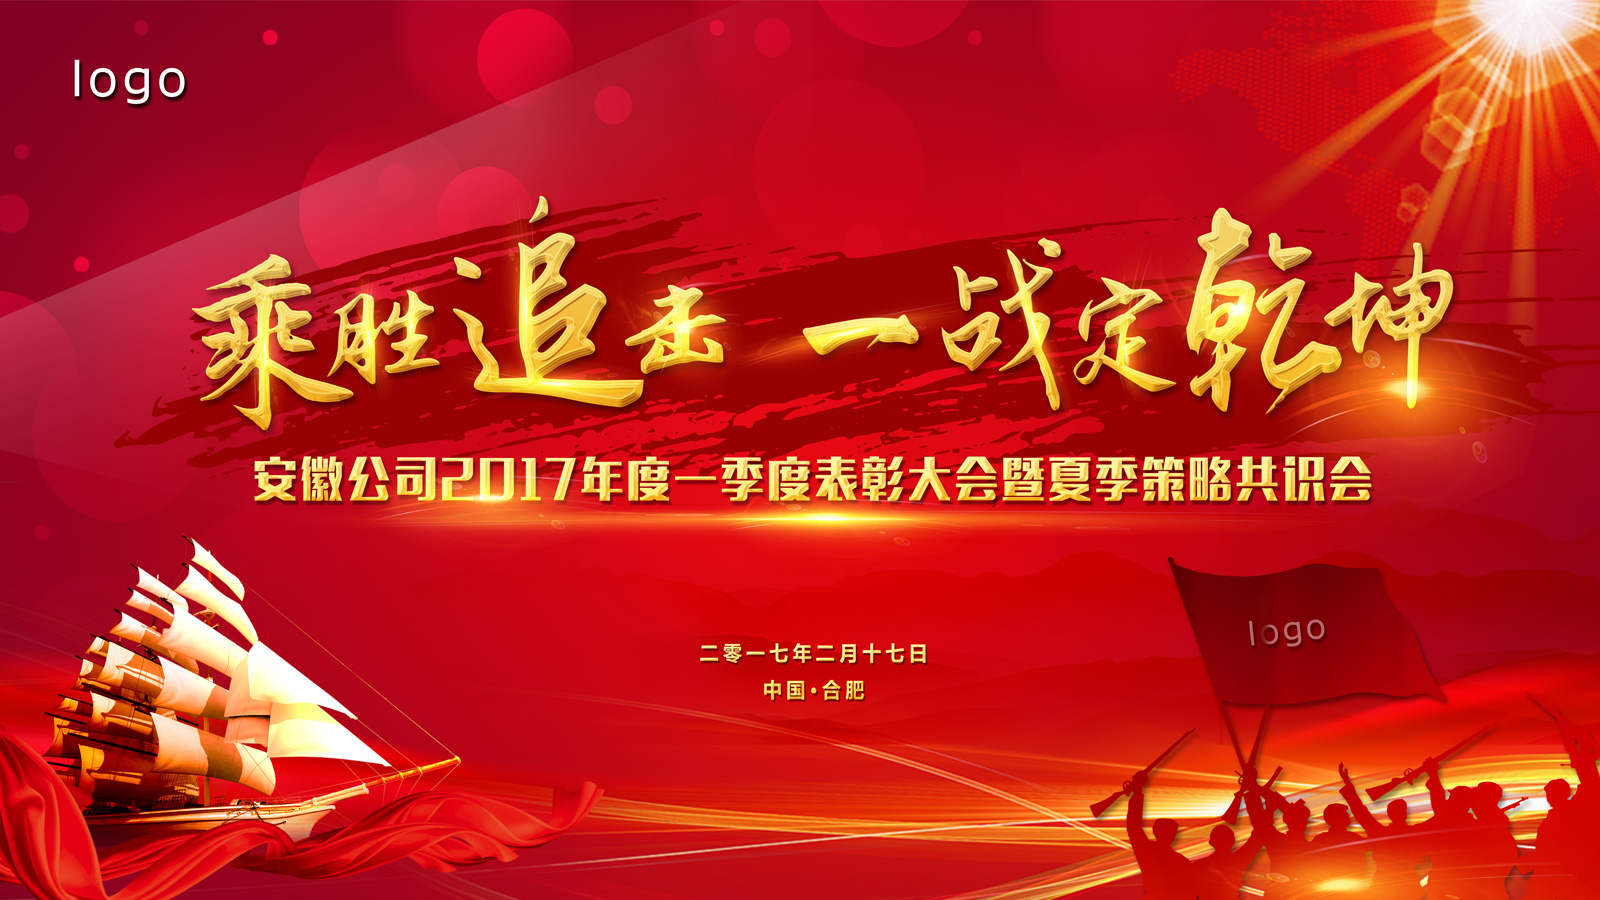 Chinese corporate culture banner company annual meeting PSD File Free Download